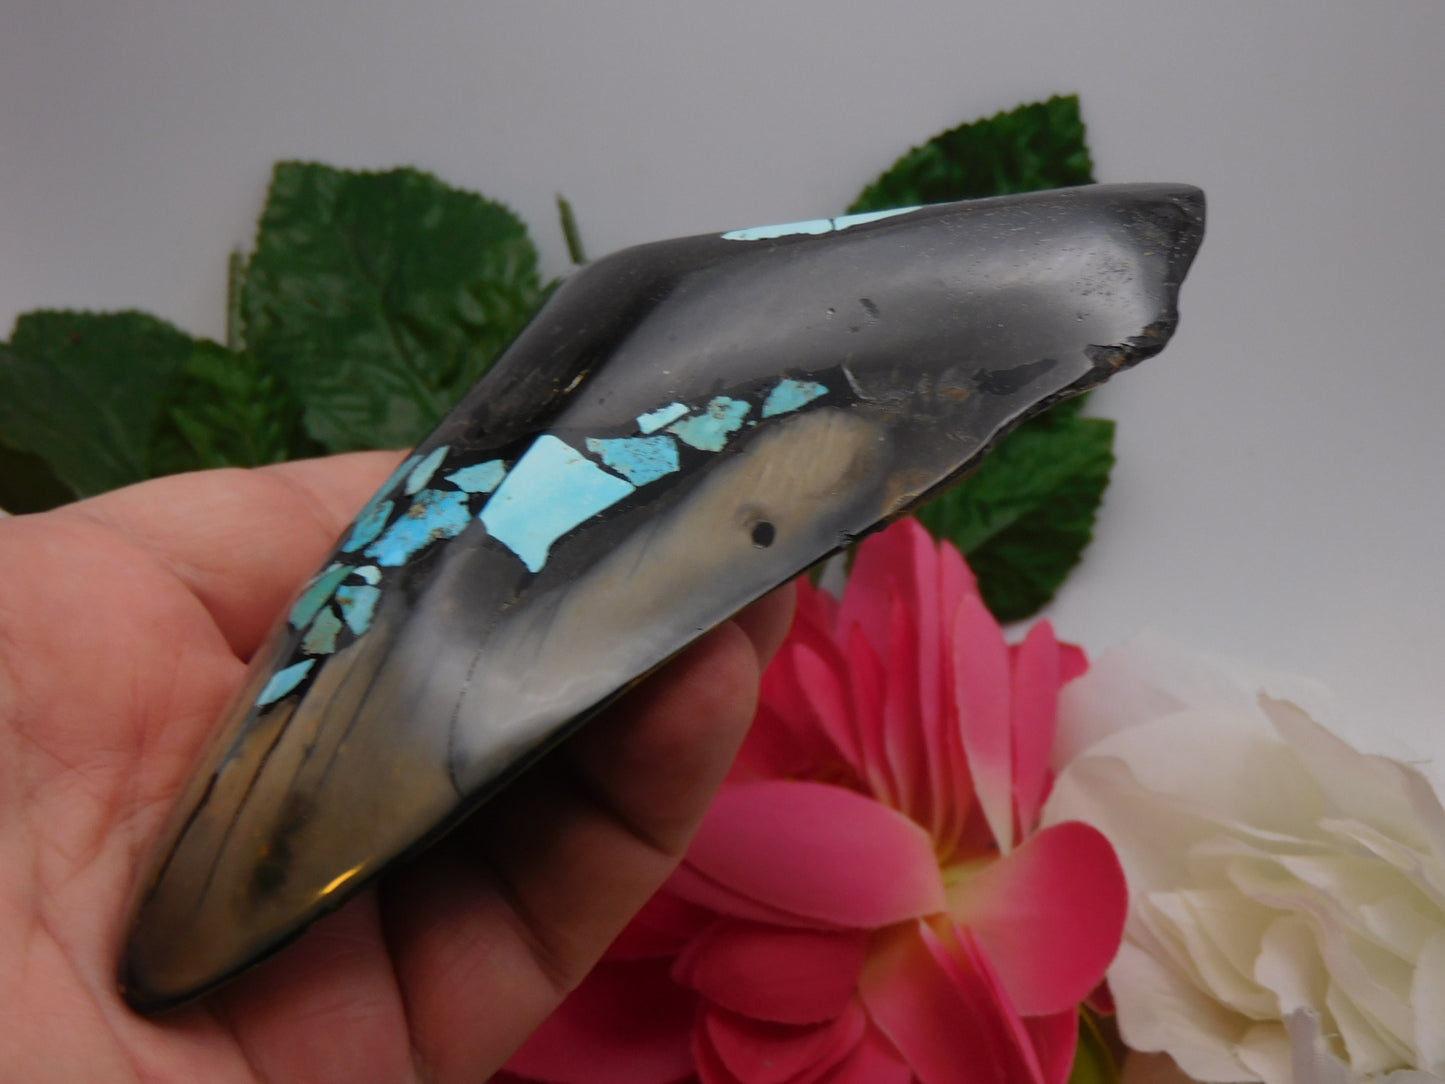 5.78" Polished Megalodon Shark Tooth with Turquoise Inlay